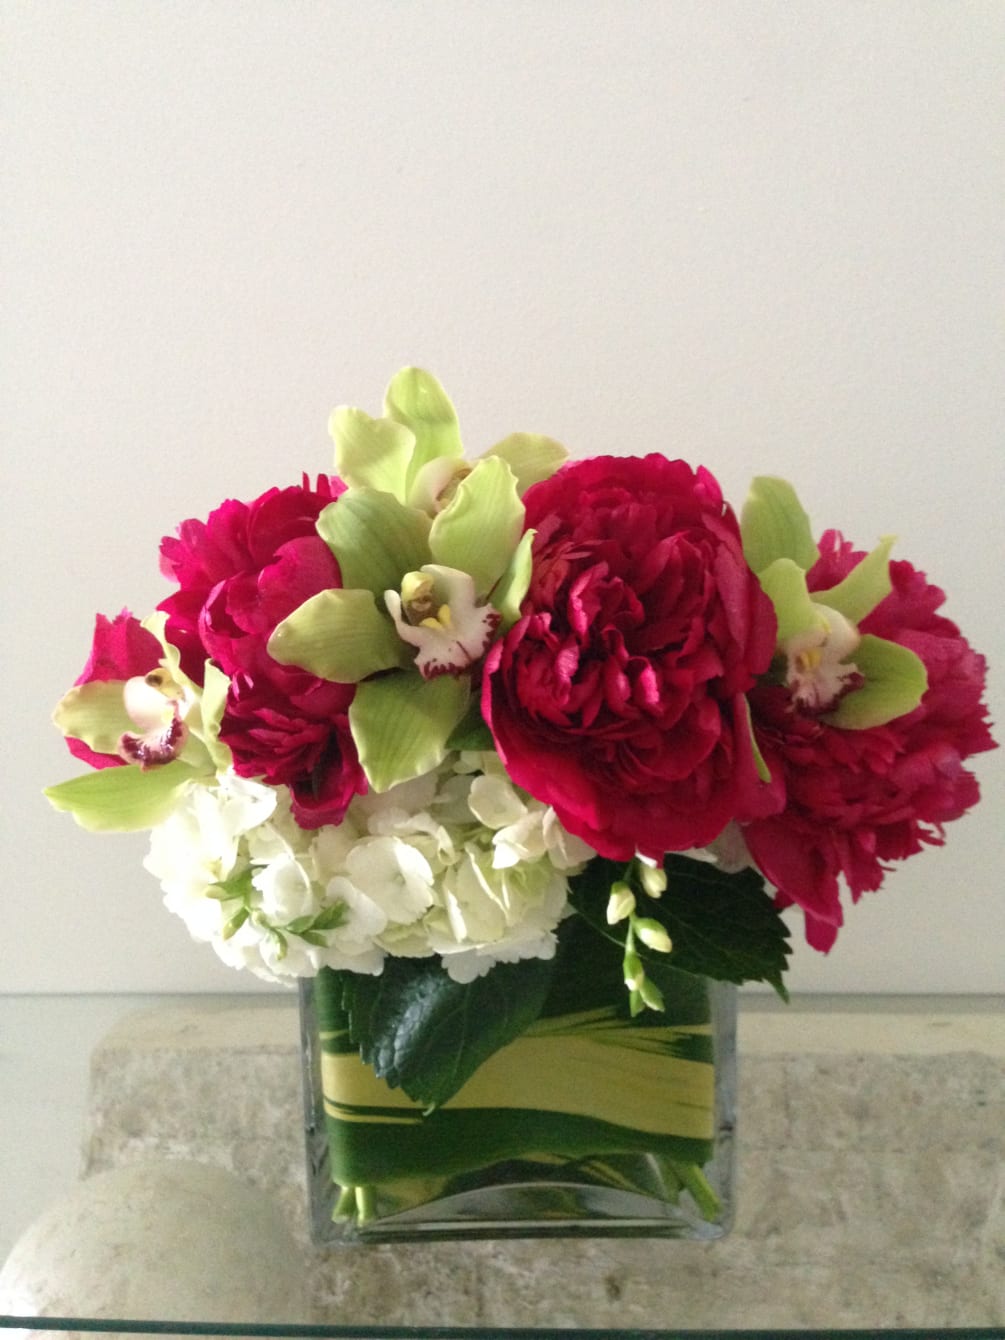 A lush bouquet of peonies, cymbidium orchids, and much more, designed in